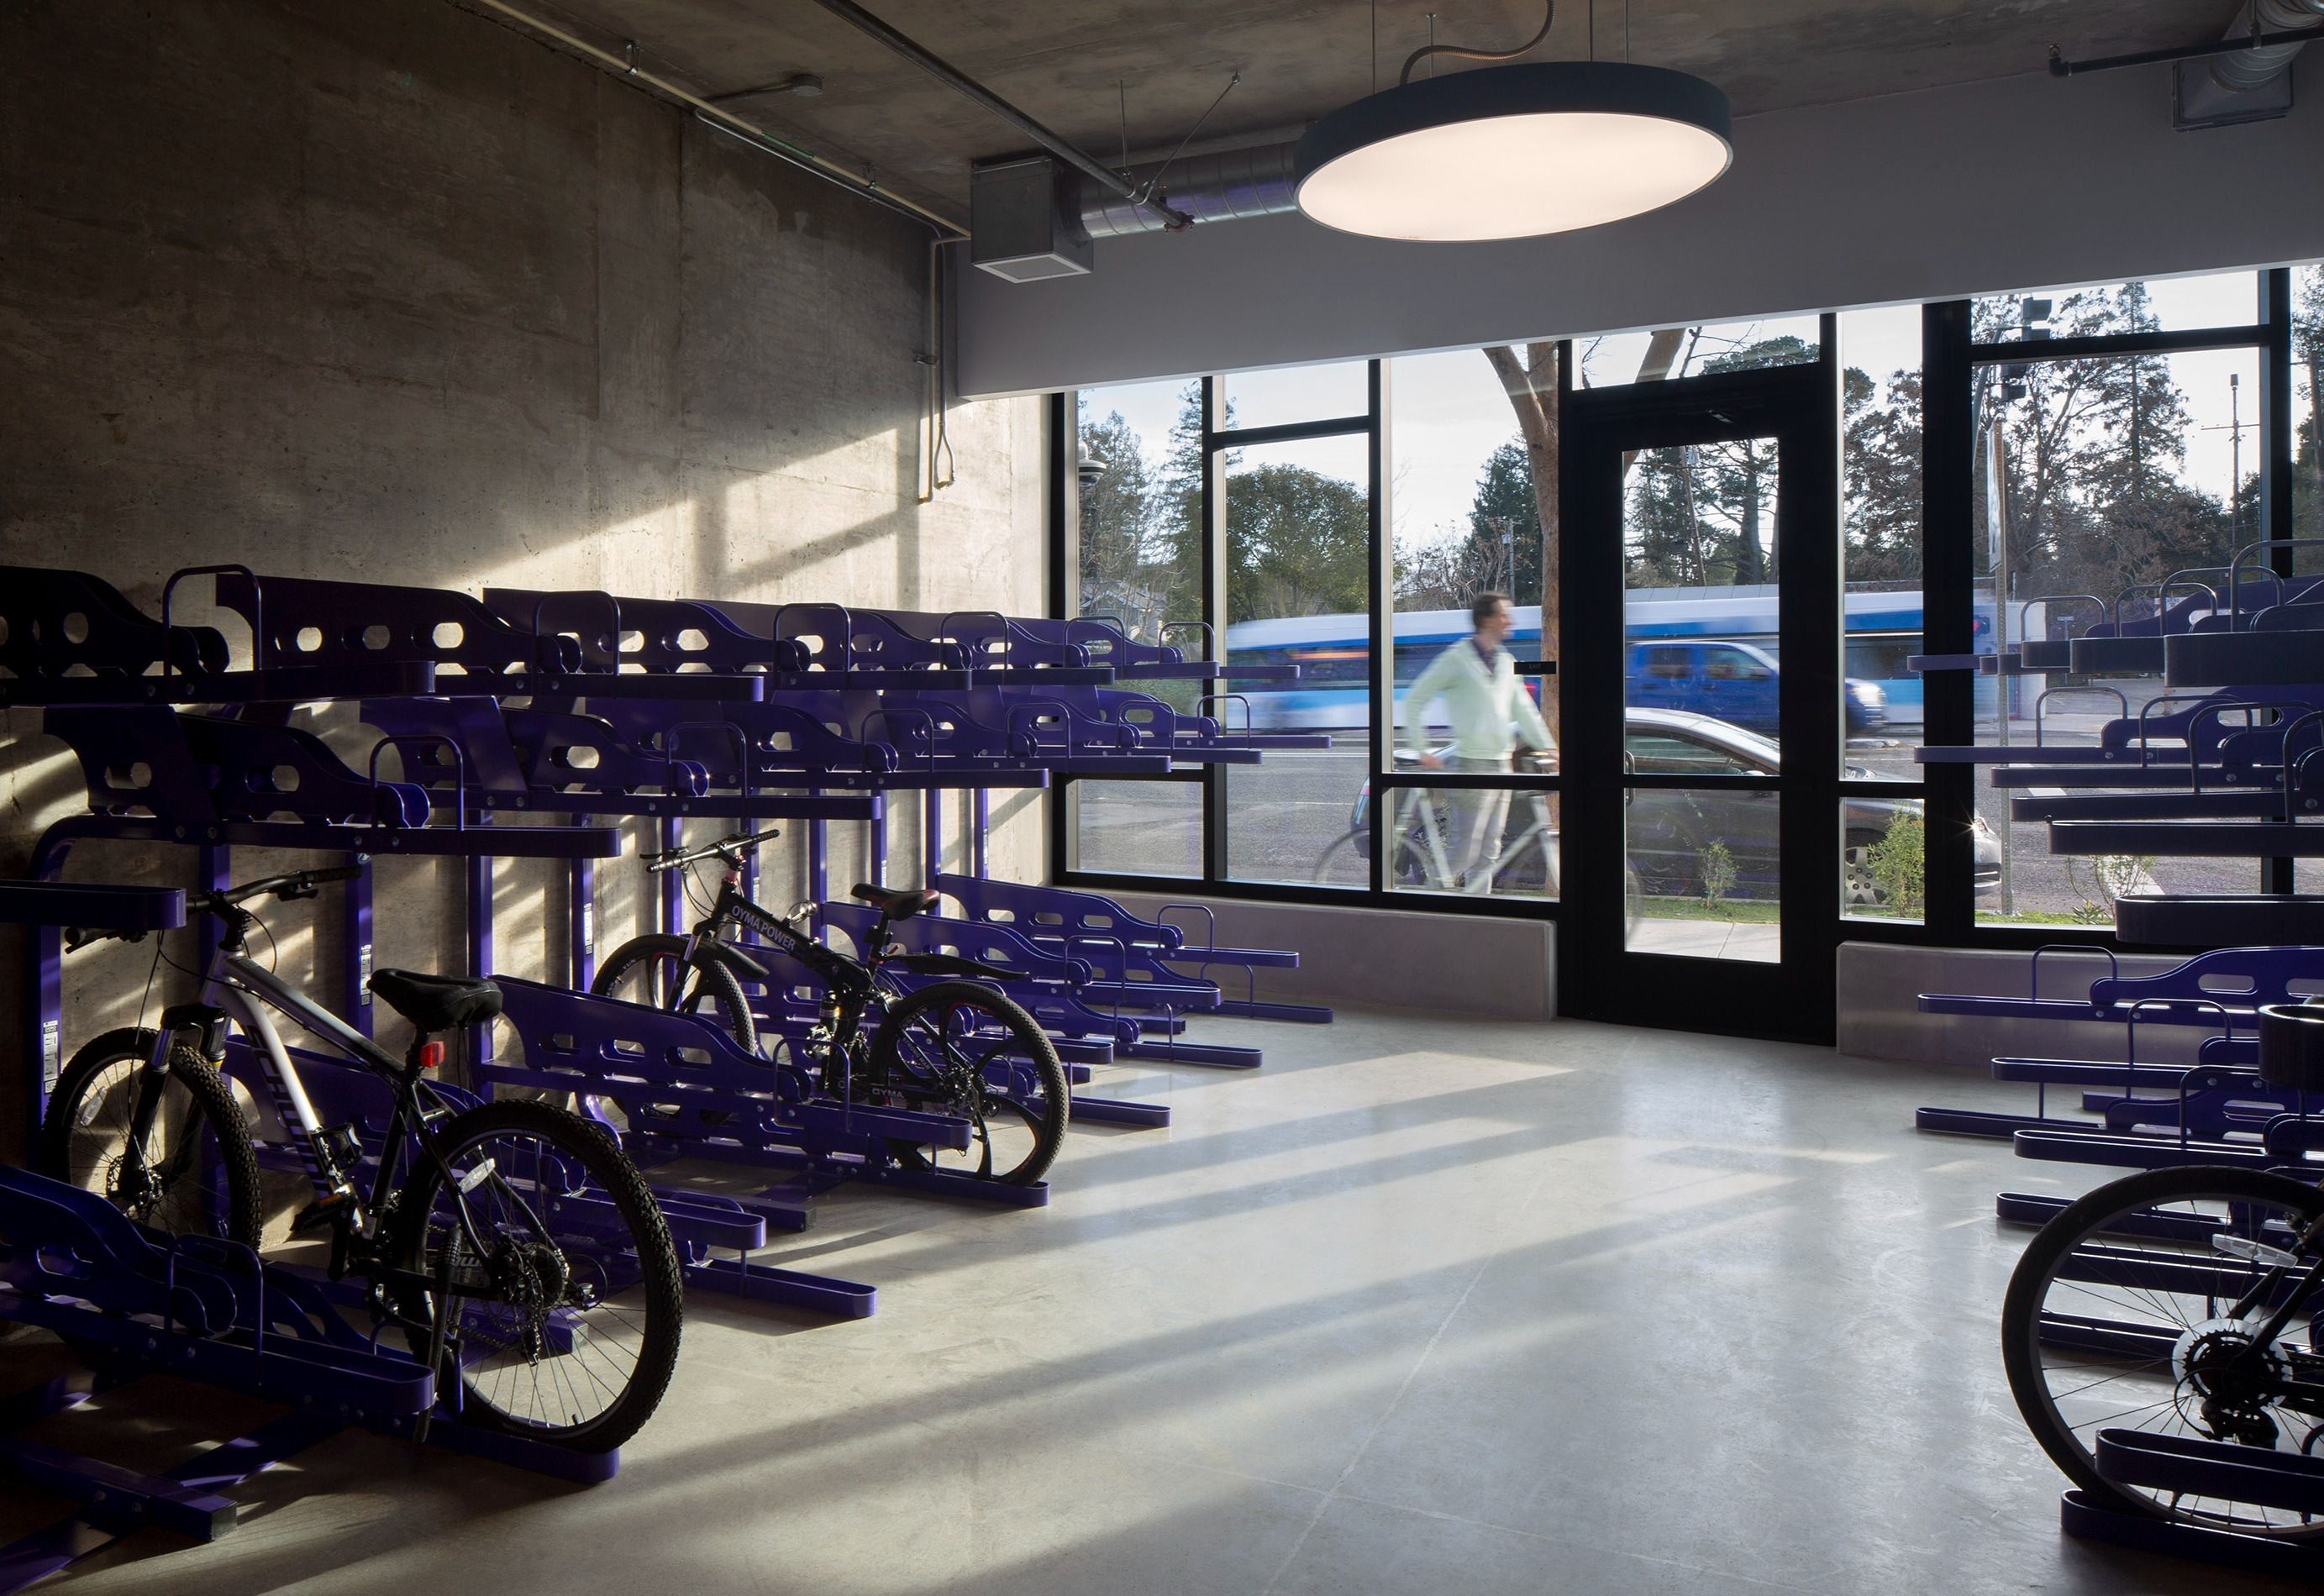 A ring pendant LED light illuminates a bike room at an affordable housing apartment complex with daylight sensors that bring the light up as natural light wanes.